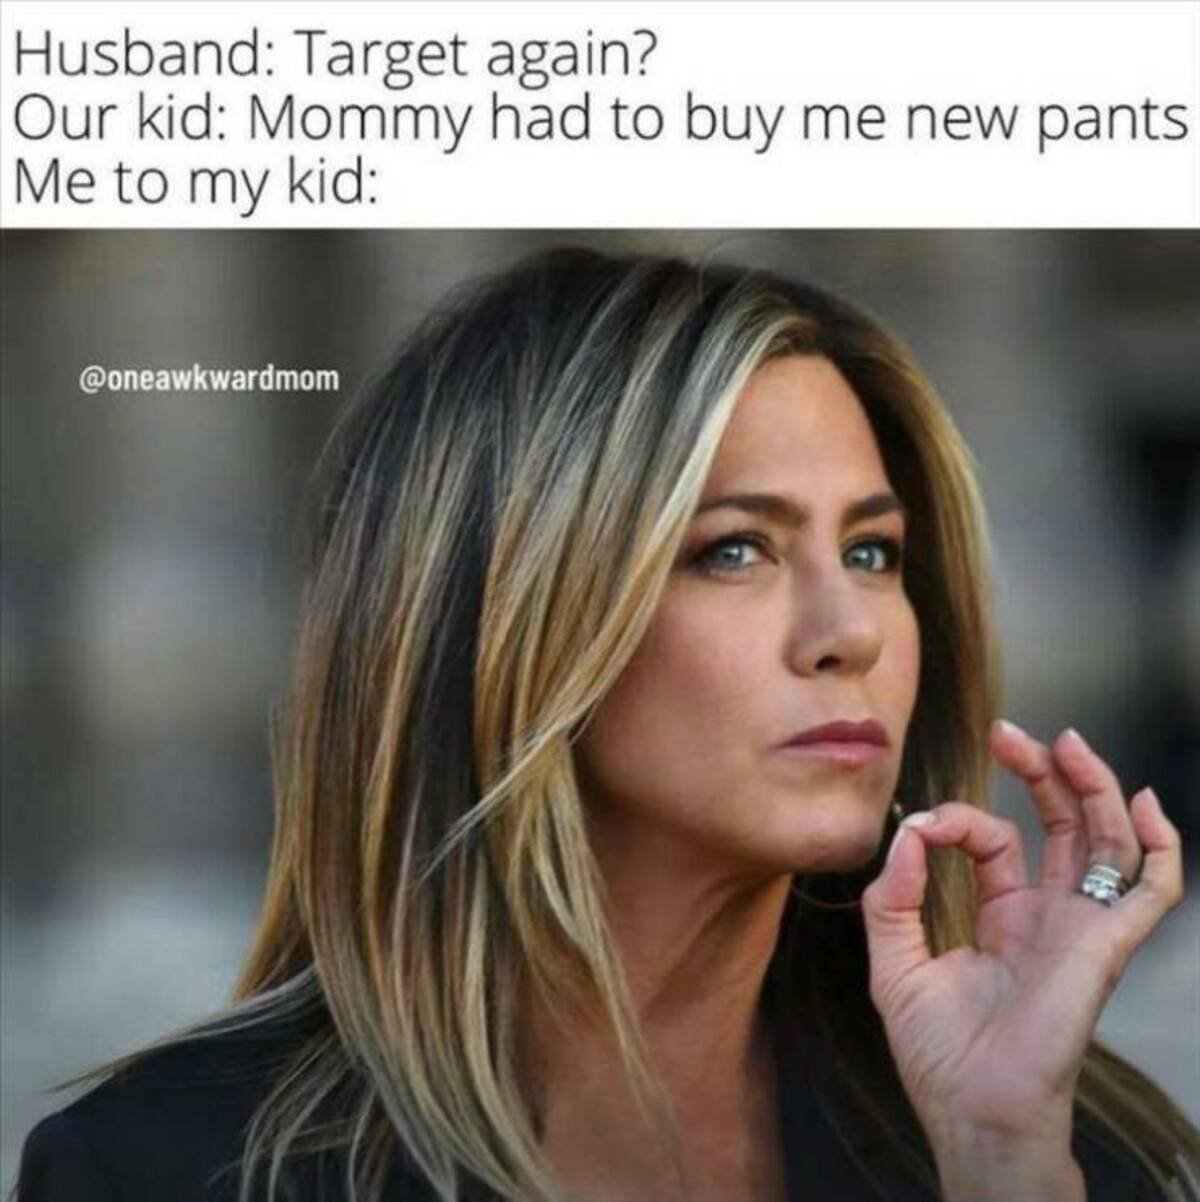 jennifer aniston serious - Husband Target again? Our kid Mommy had to buy me new pants Me to my kid